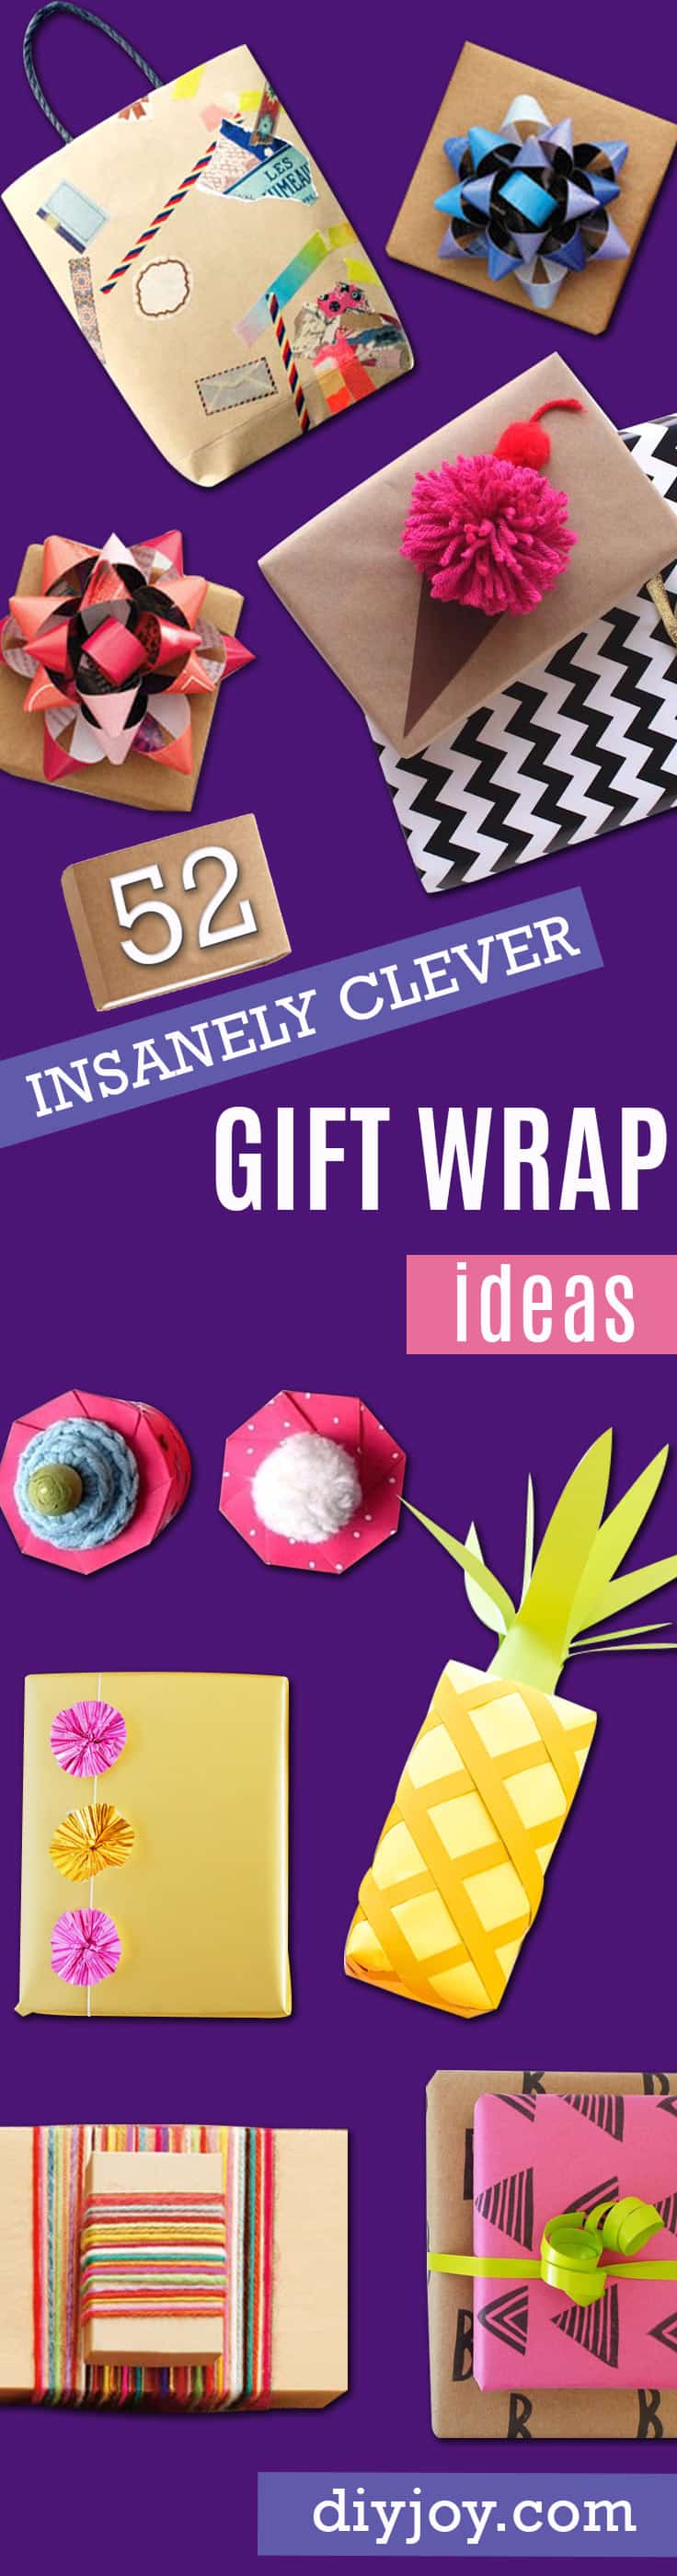 DIY Gift Wrapping Ideas - How To Wrap A Present - Tutorials, Cool Ideas and Instructions | Cute Gift Wrap Ideas for Christmas, Birthdays and Holidays | Tips for Bows and Creative Wrapping Papers #gifts #diys